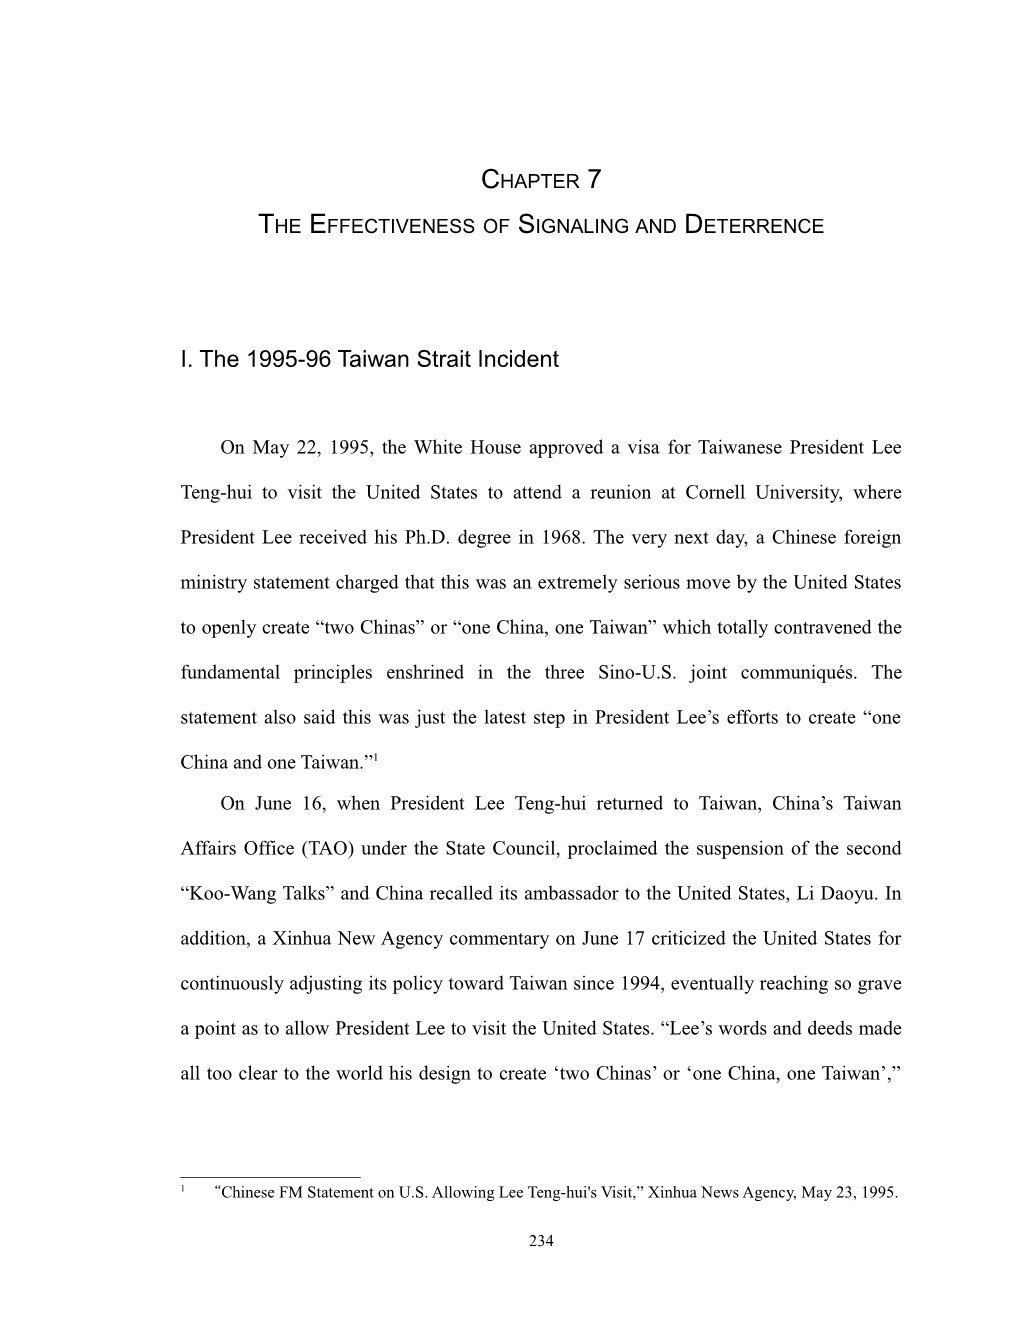 Chapter 3 Theory Evaluation: Initiation and Outcome of Economic Sanctions